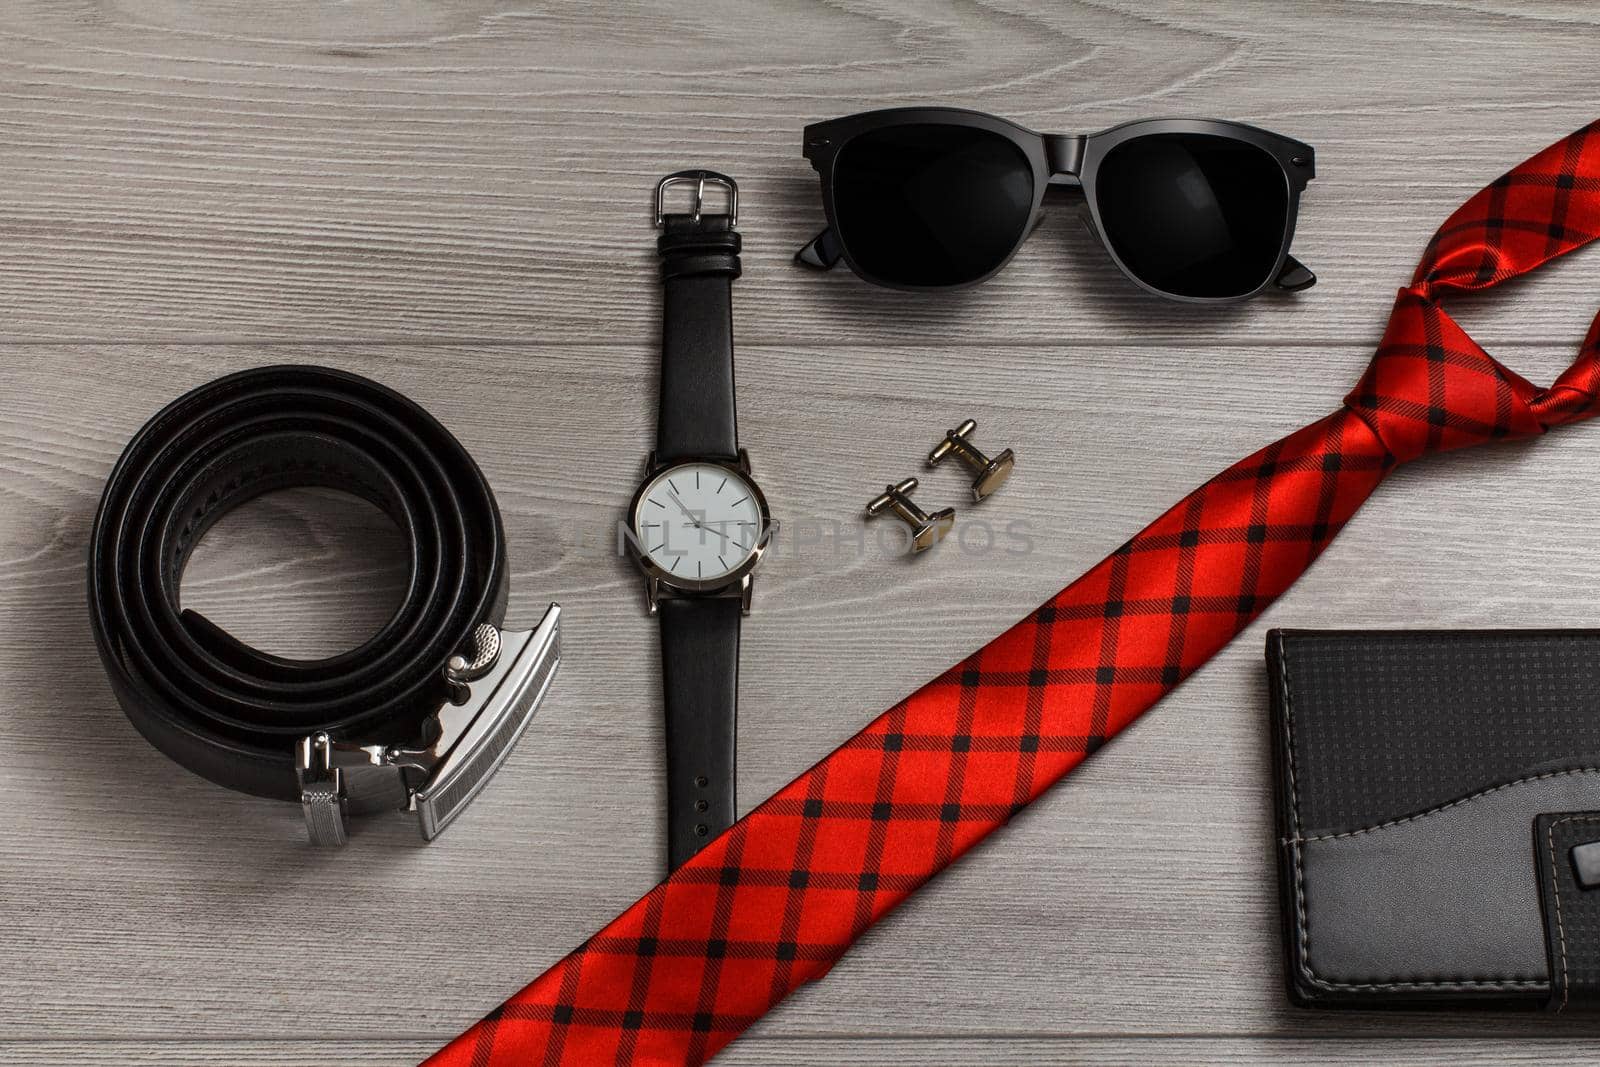 Leather belt with metal buckle, watch with a leather strap, sunglasses, red silk tie, cufflinks, notebook in leather cover on a gray wooden background